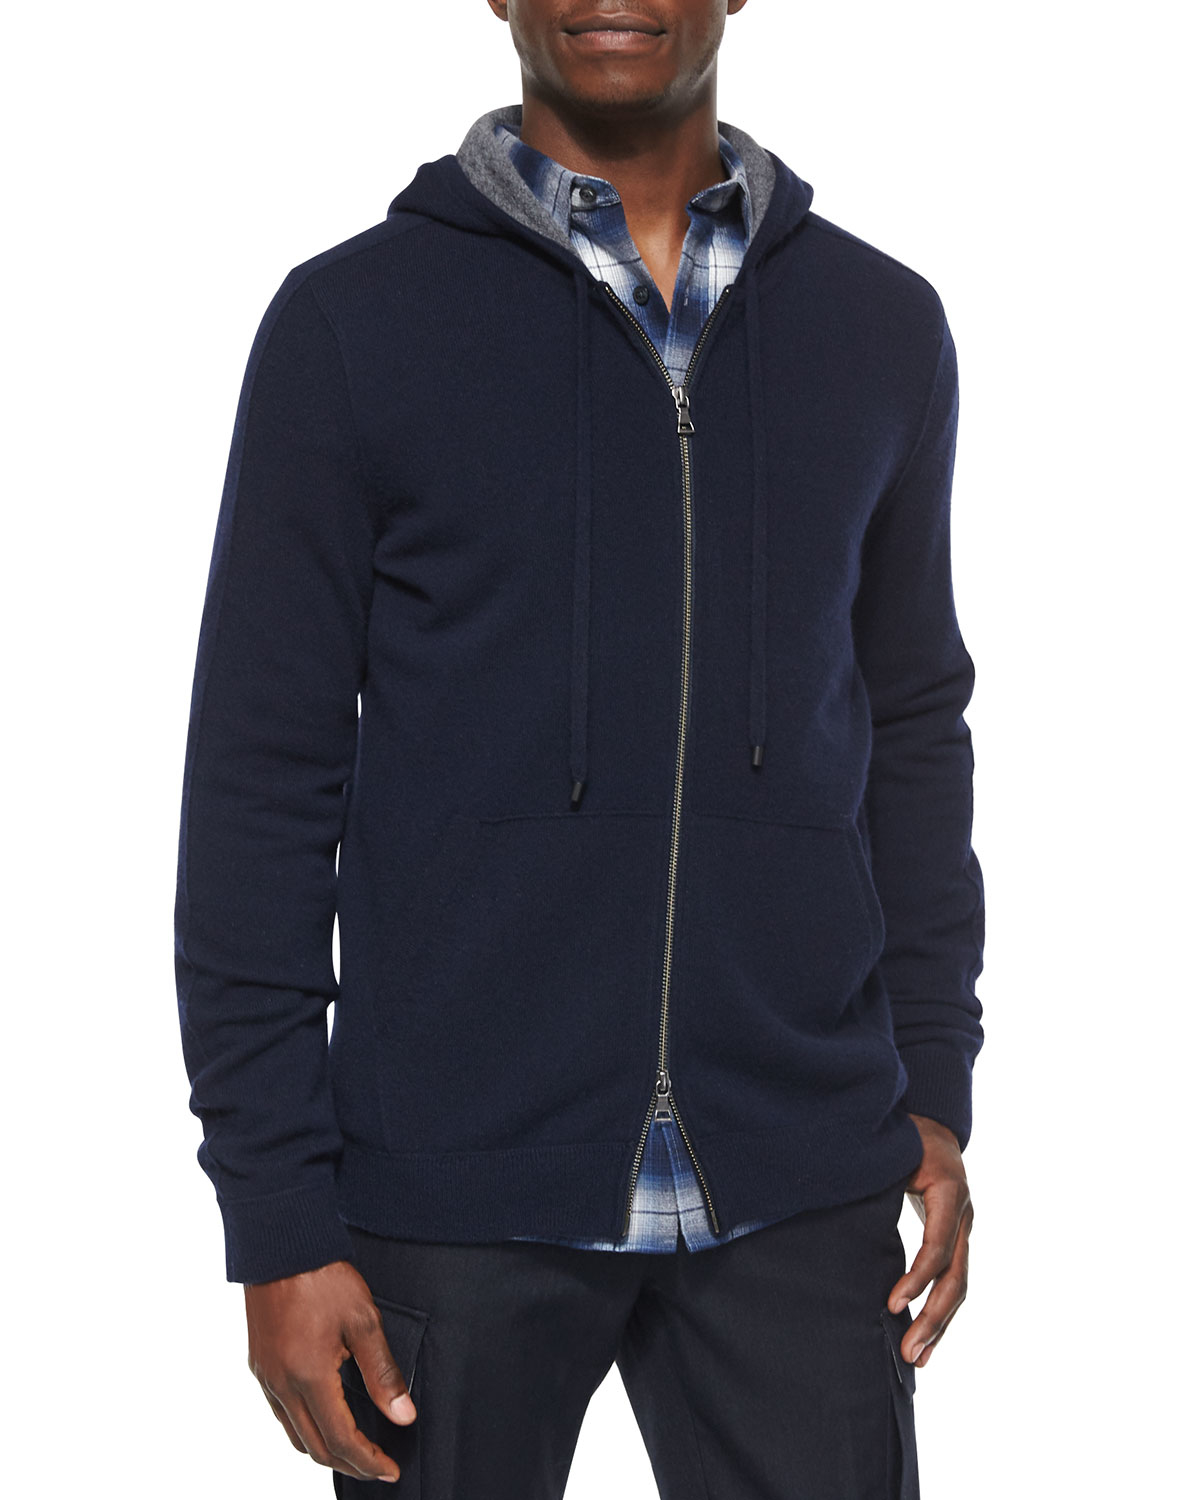 Vince Cashmere Full-zip Hoodie in Blue for Men - Lyst